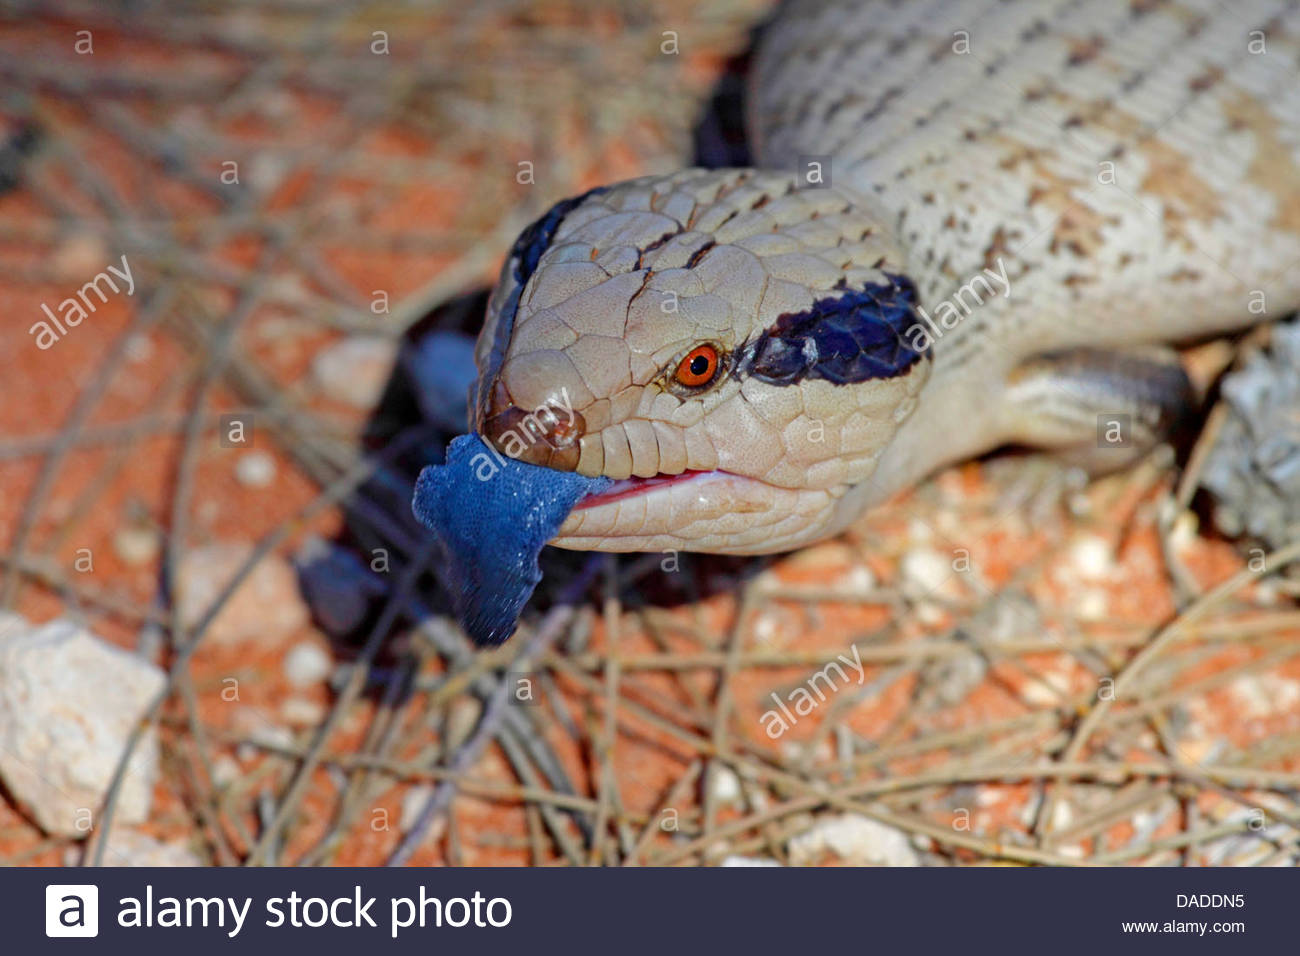 Blue-Tongue Skink Pics, Animal Collection